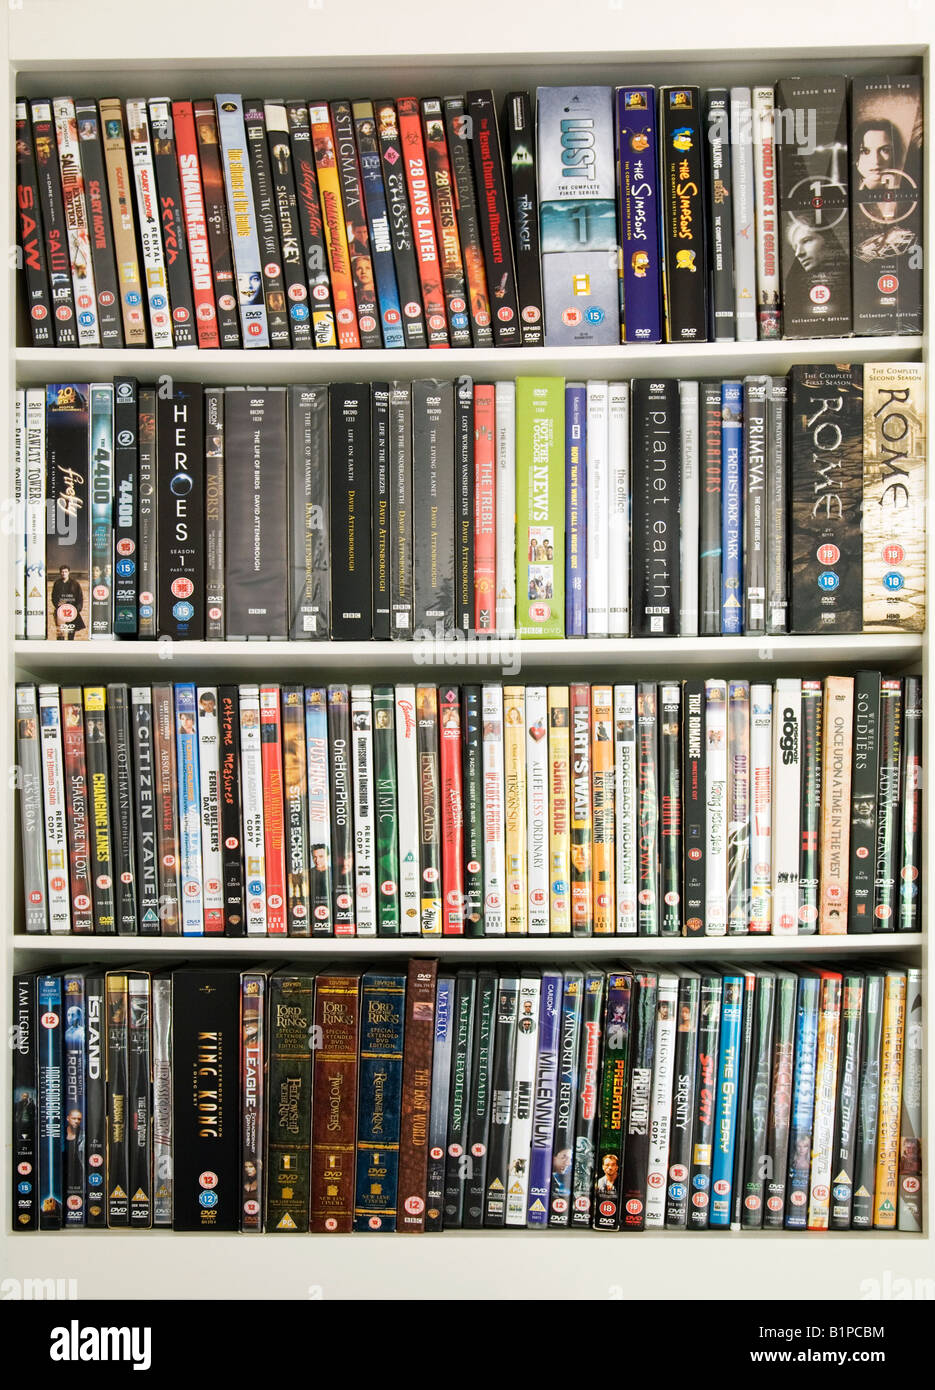 Dvd Movies High Resolution Stock Photography And Images Alamy